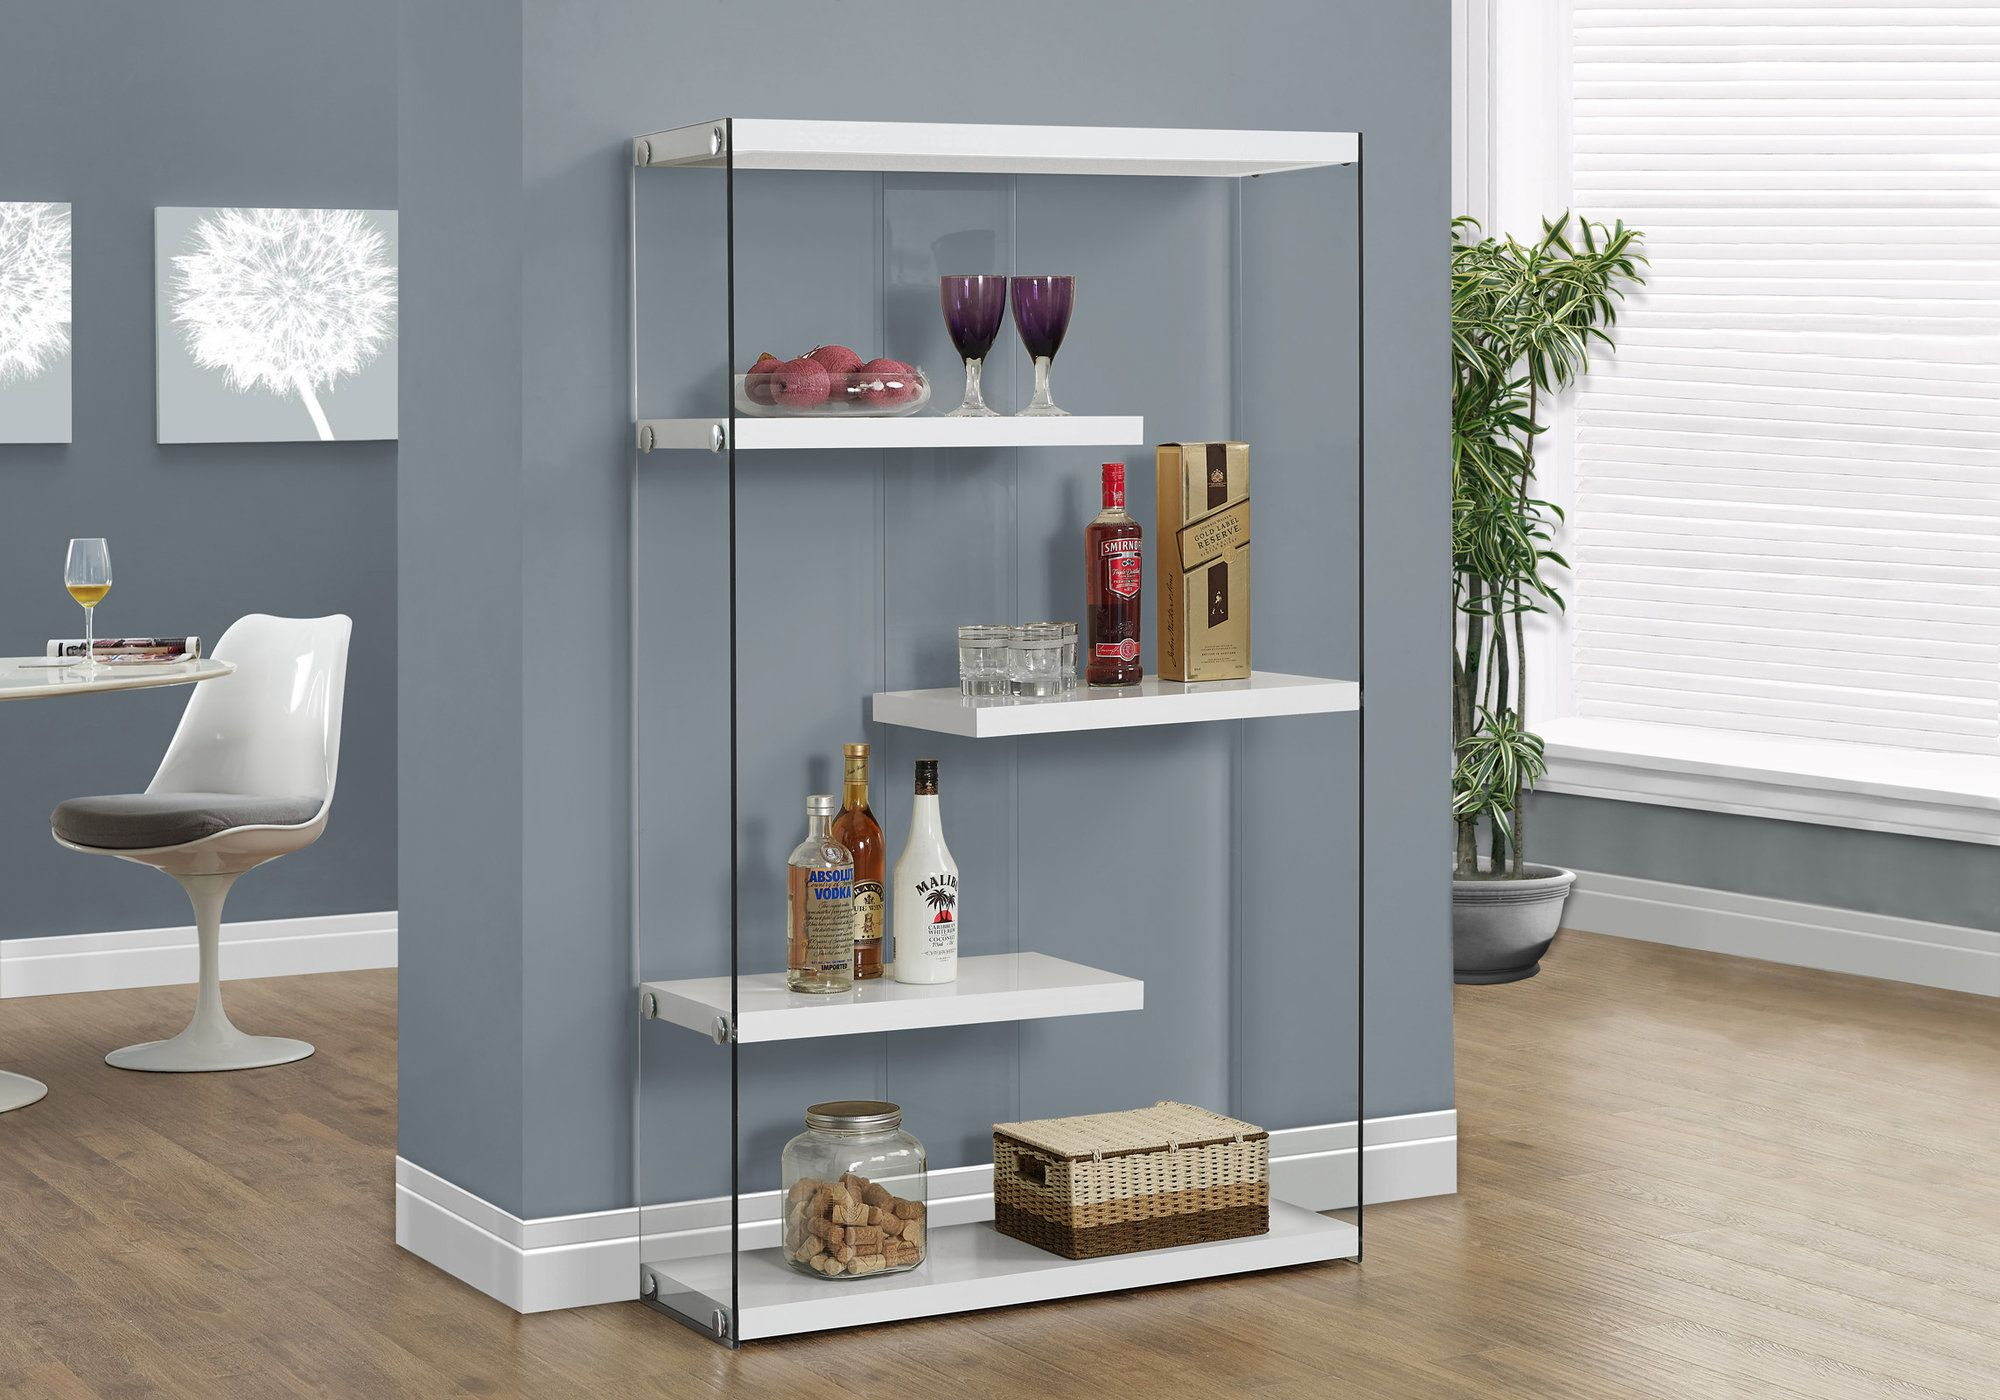 I 3290 - BOOKCASE - 60"H / GLOSSY WHITE WITH TEMPERED GLASS BY MONARCH SPECIALTIES INC